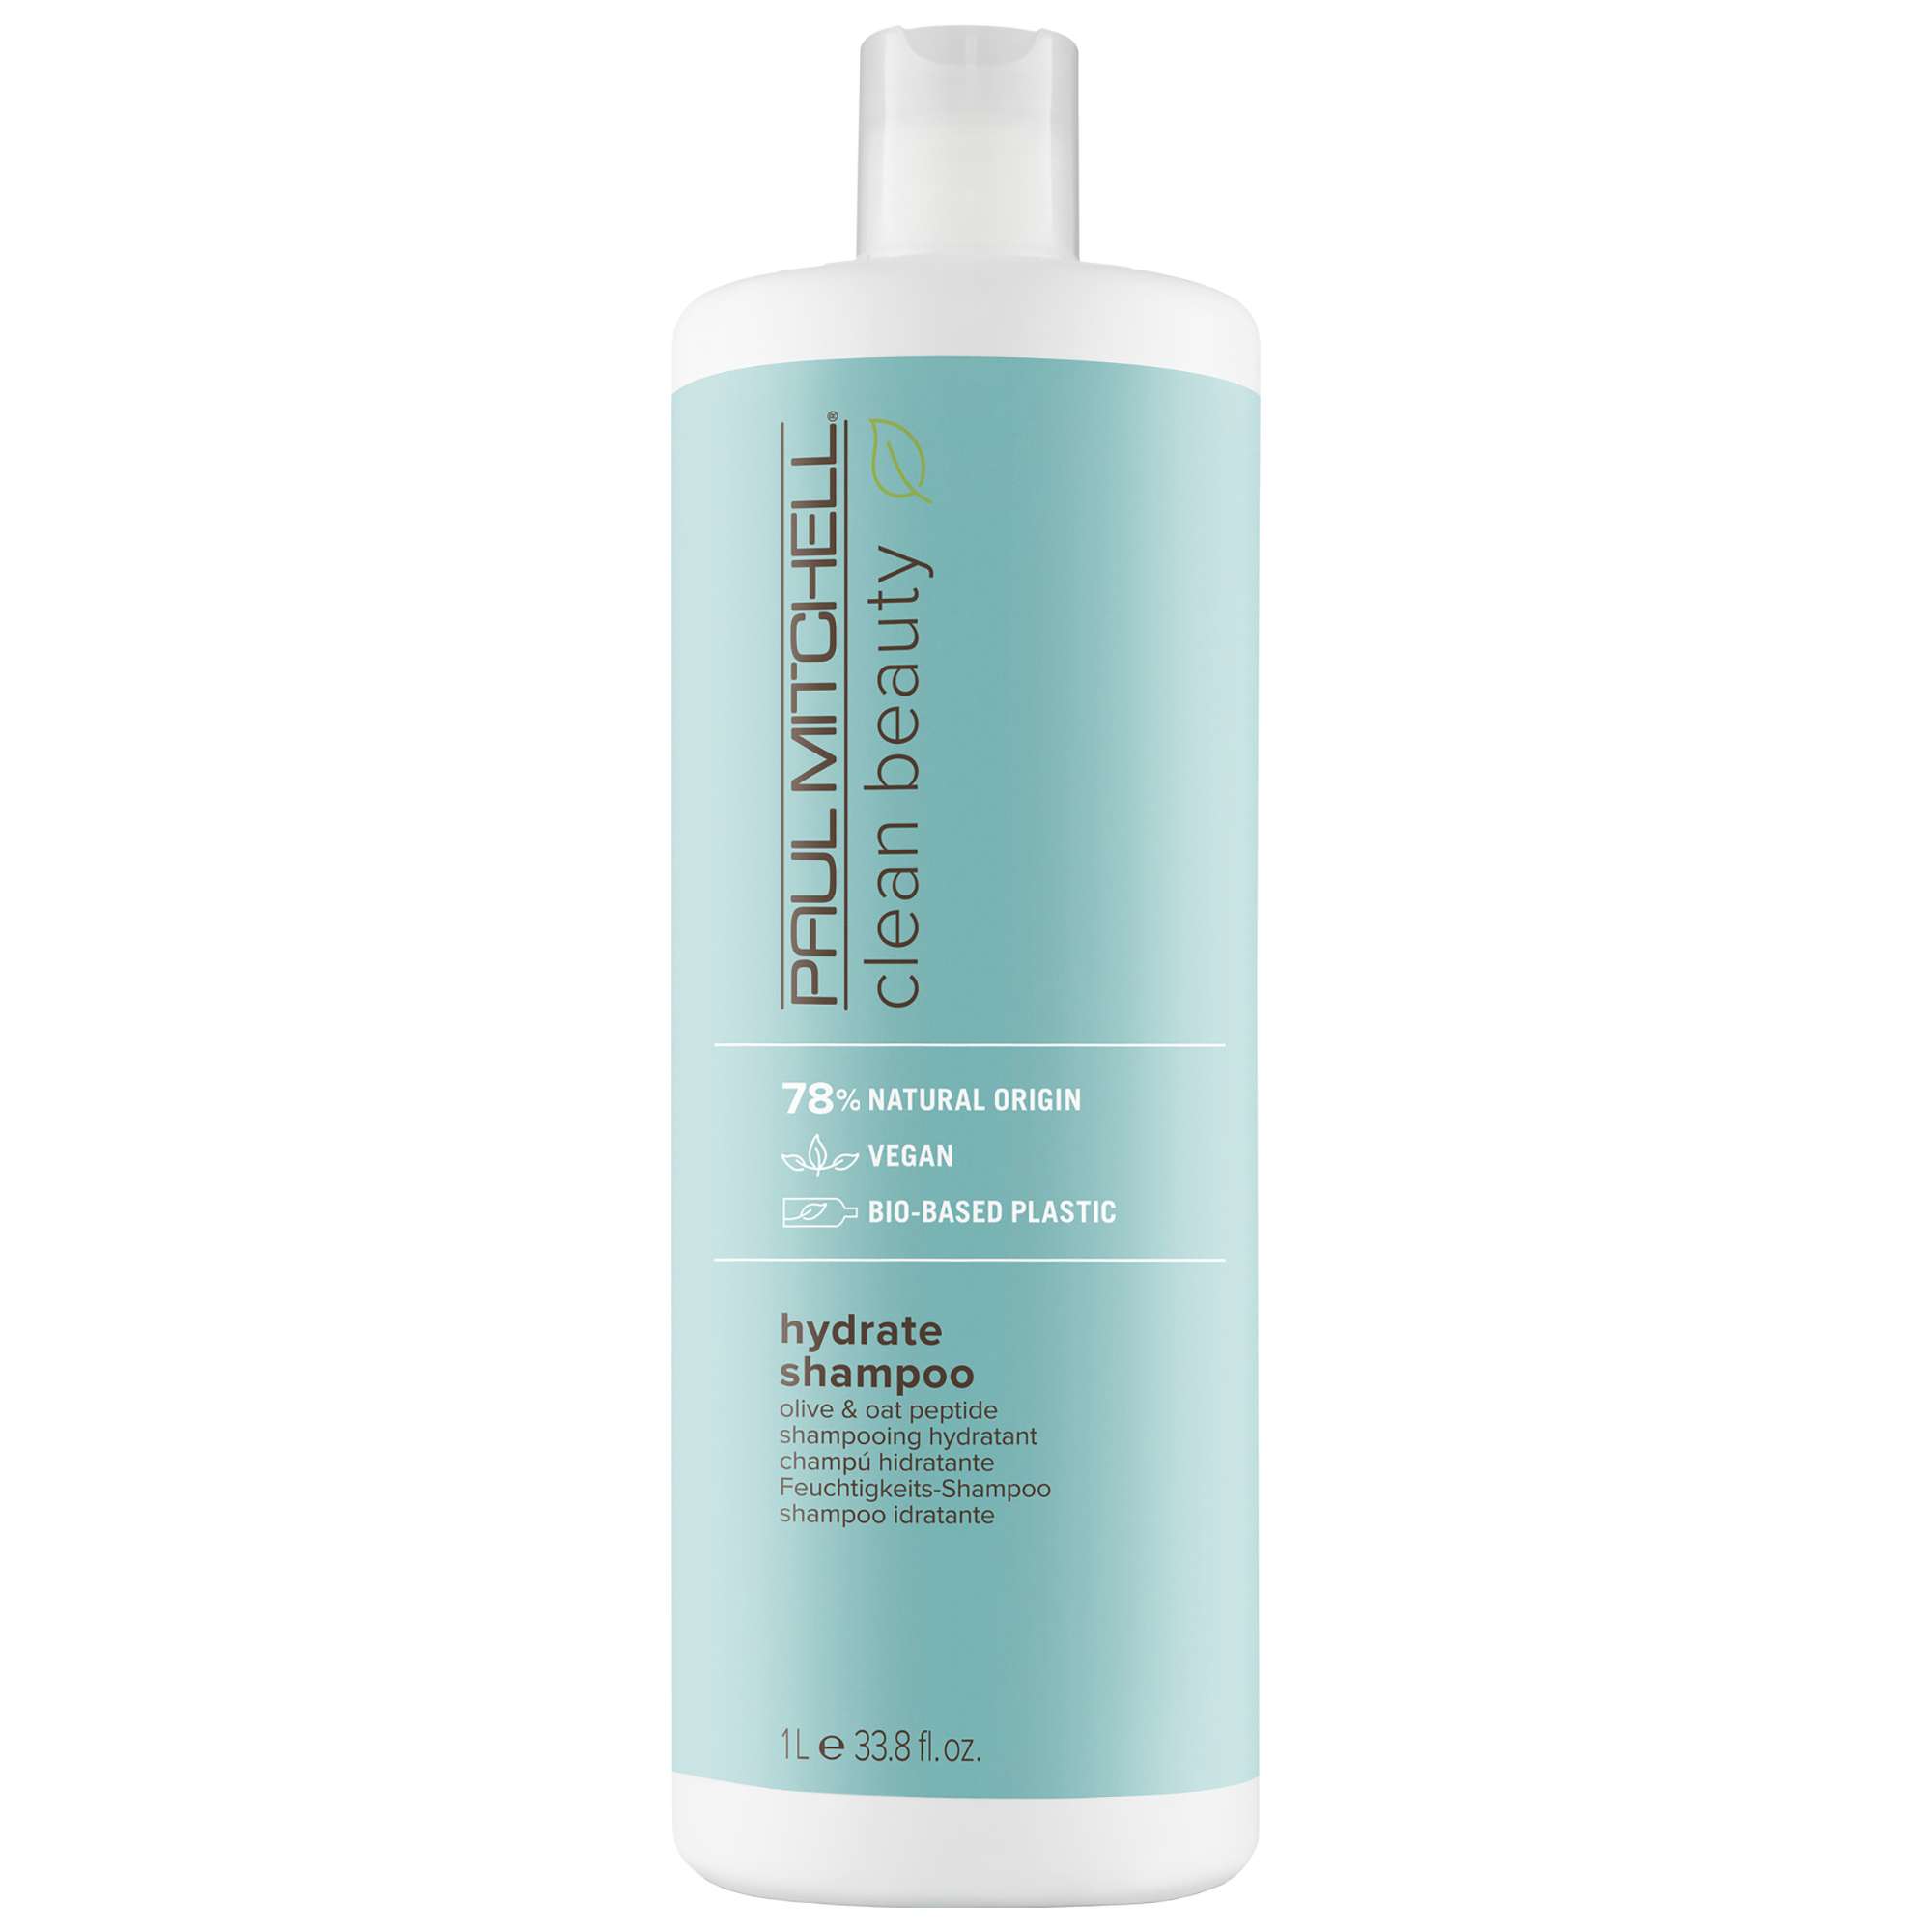 Image of Paul Mitchell Clean Beauty Hydrate Shampoo 1000ml